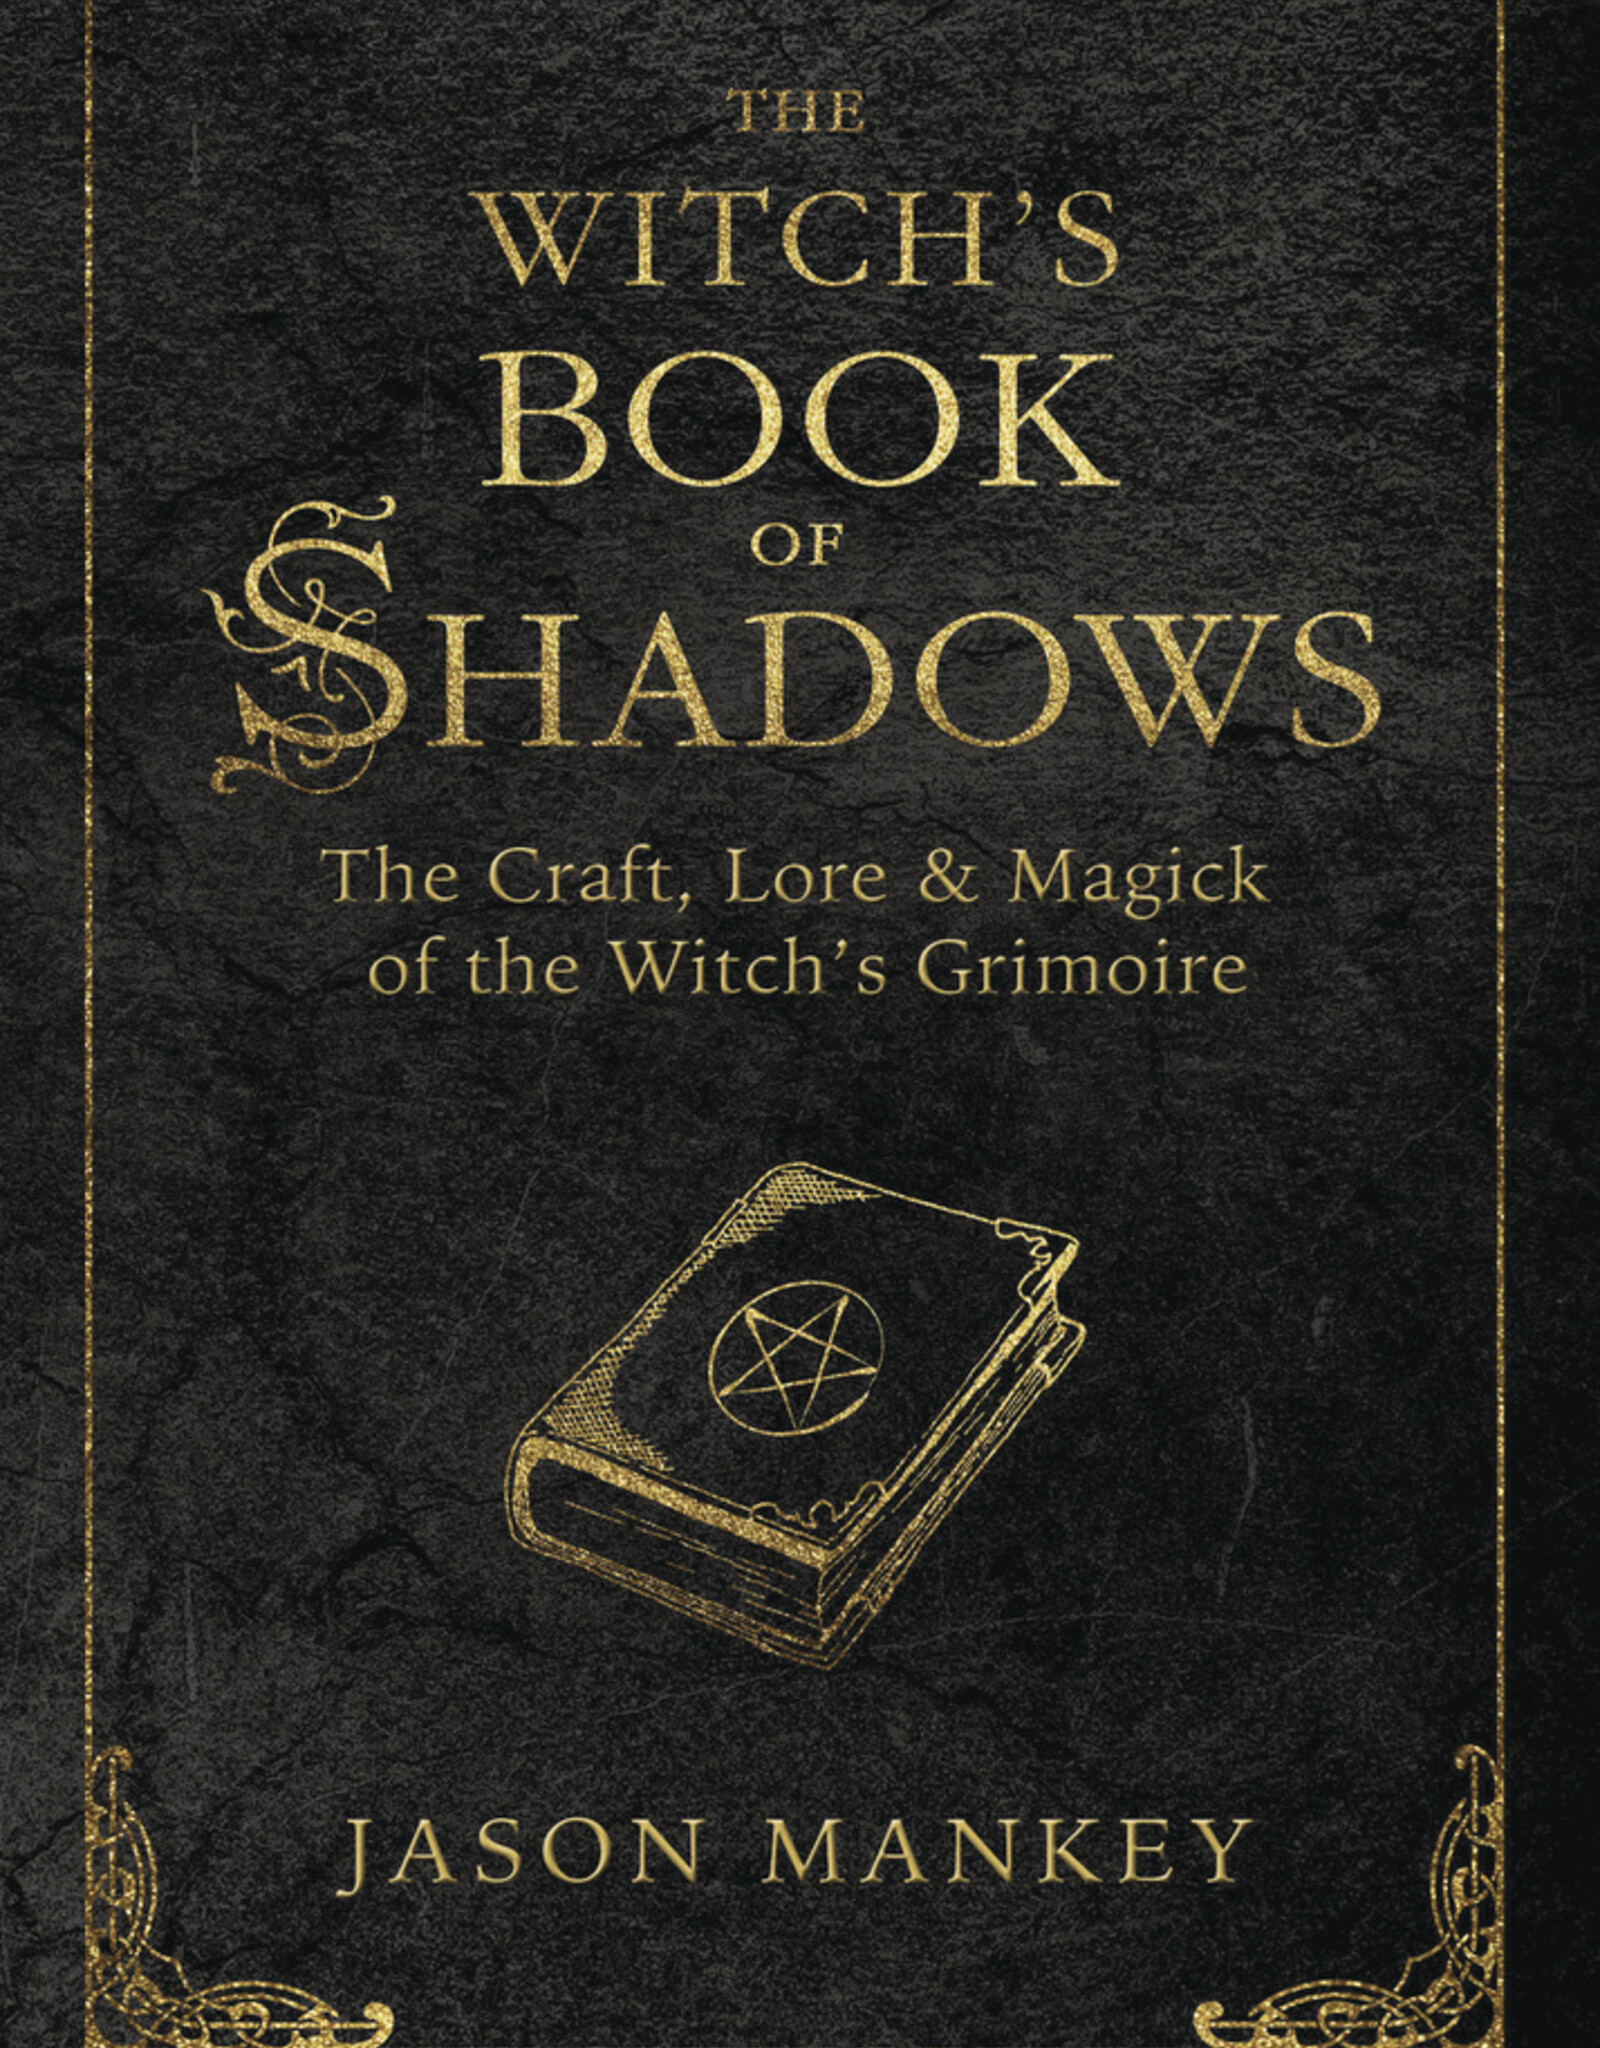 Llewelyn *The Witch's Book of Shadows